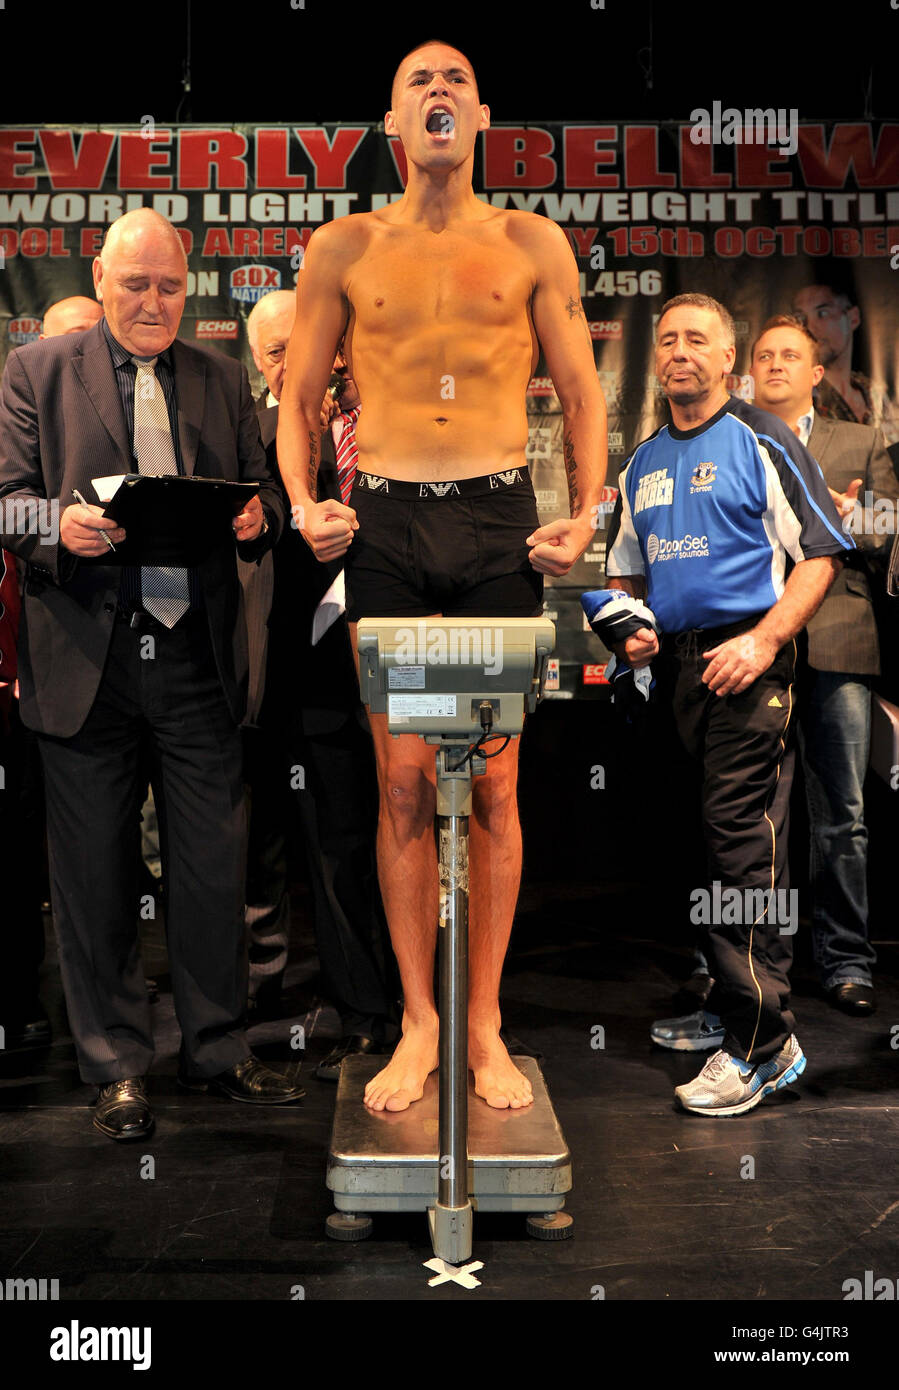 Boxing - WBO Light Heavyweight Title - Tony Bellew v Nathan Cleverley - Weigh-In - Contemporary Urban Centre. Tony Bellew during the weigh-in at the Contemporary Urban Centre, Liverpool. Stock Photo